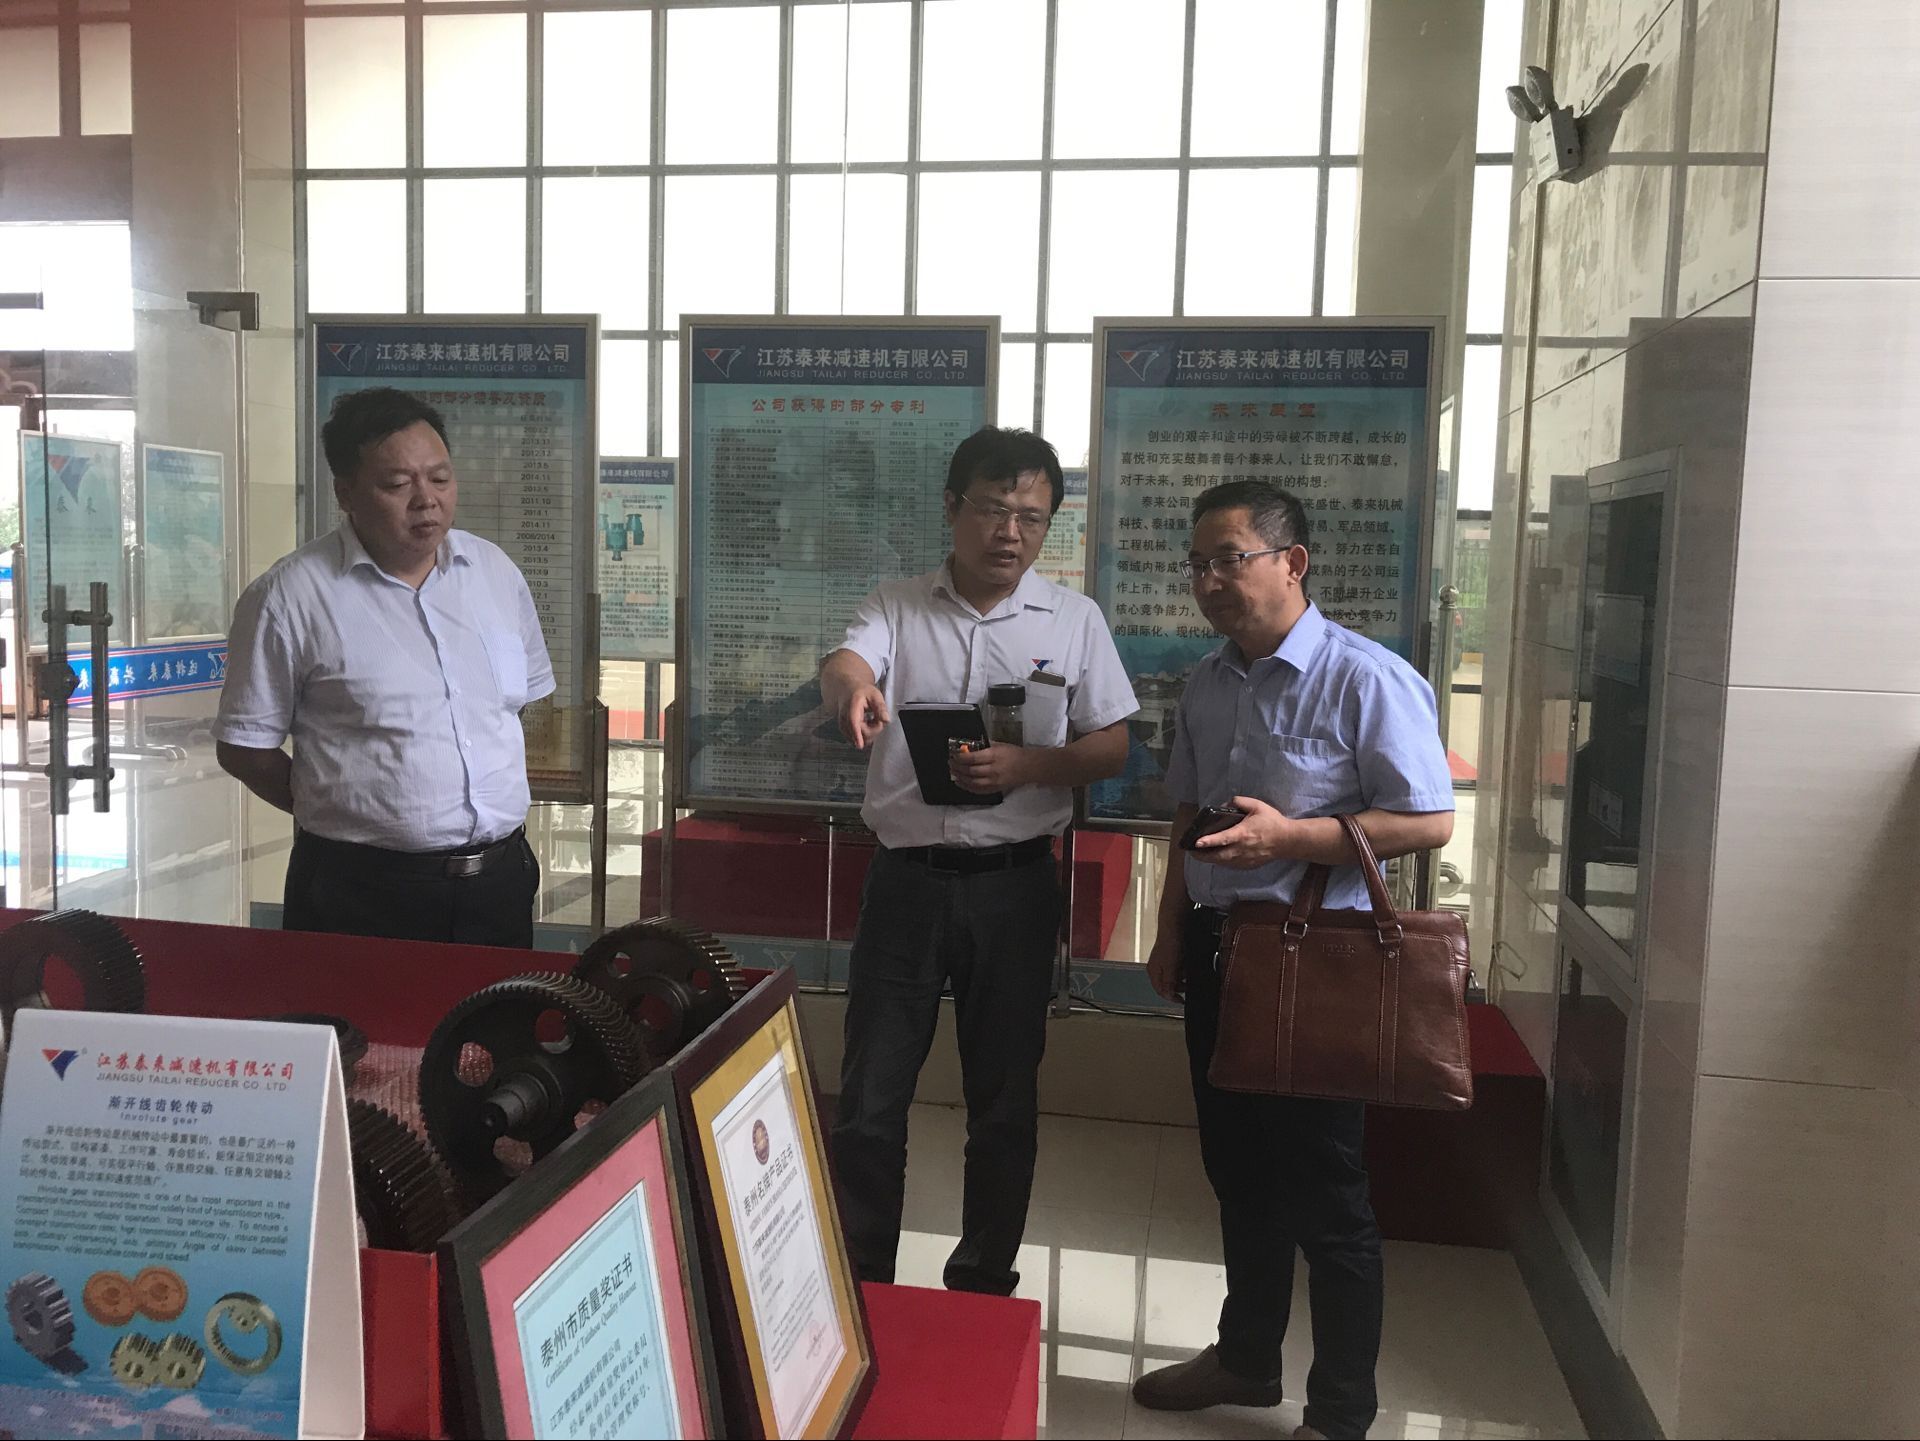 On August 29th, Professor Zhou Fei from Nanjing University of Aeronautics and Astronautics visited the company to inspect technological innovation projects